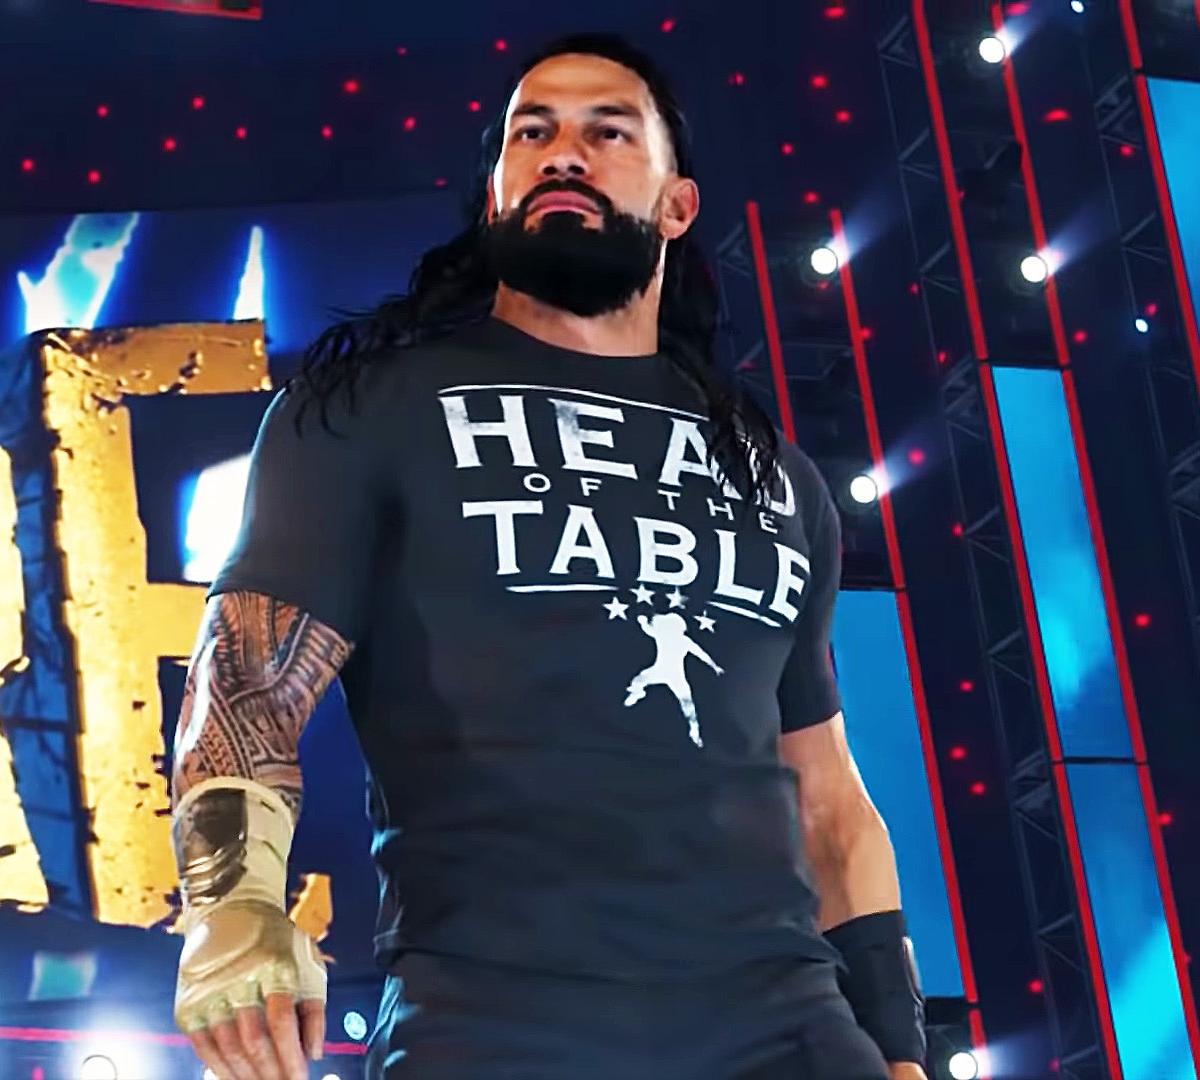 WWE 2K22 Roman Reigns Roster And Rating Reveal –